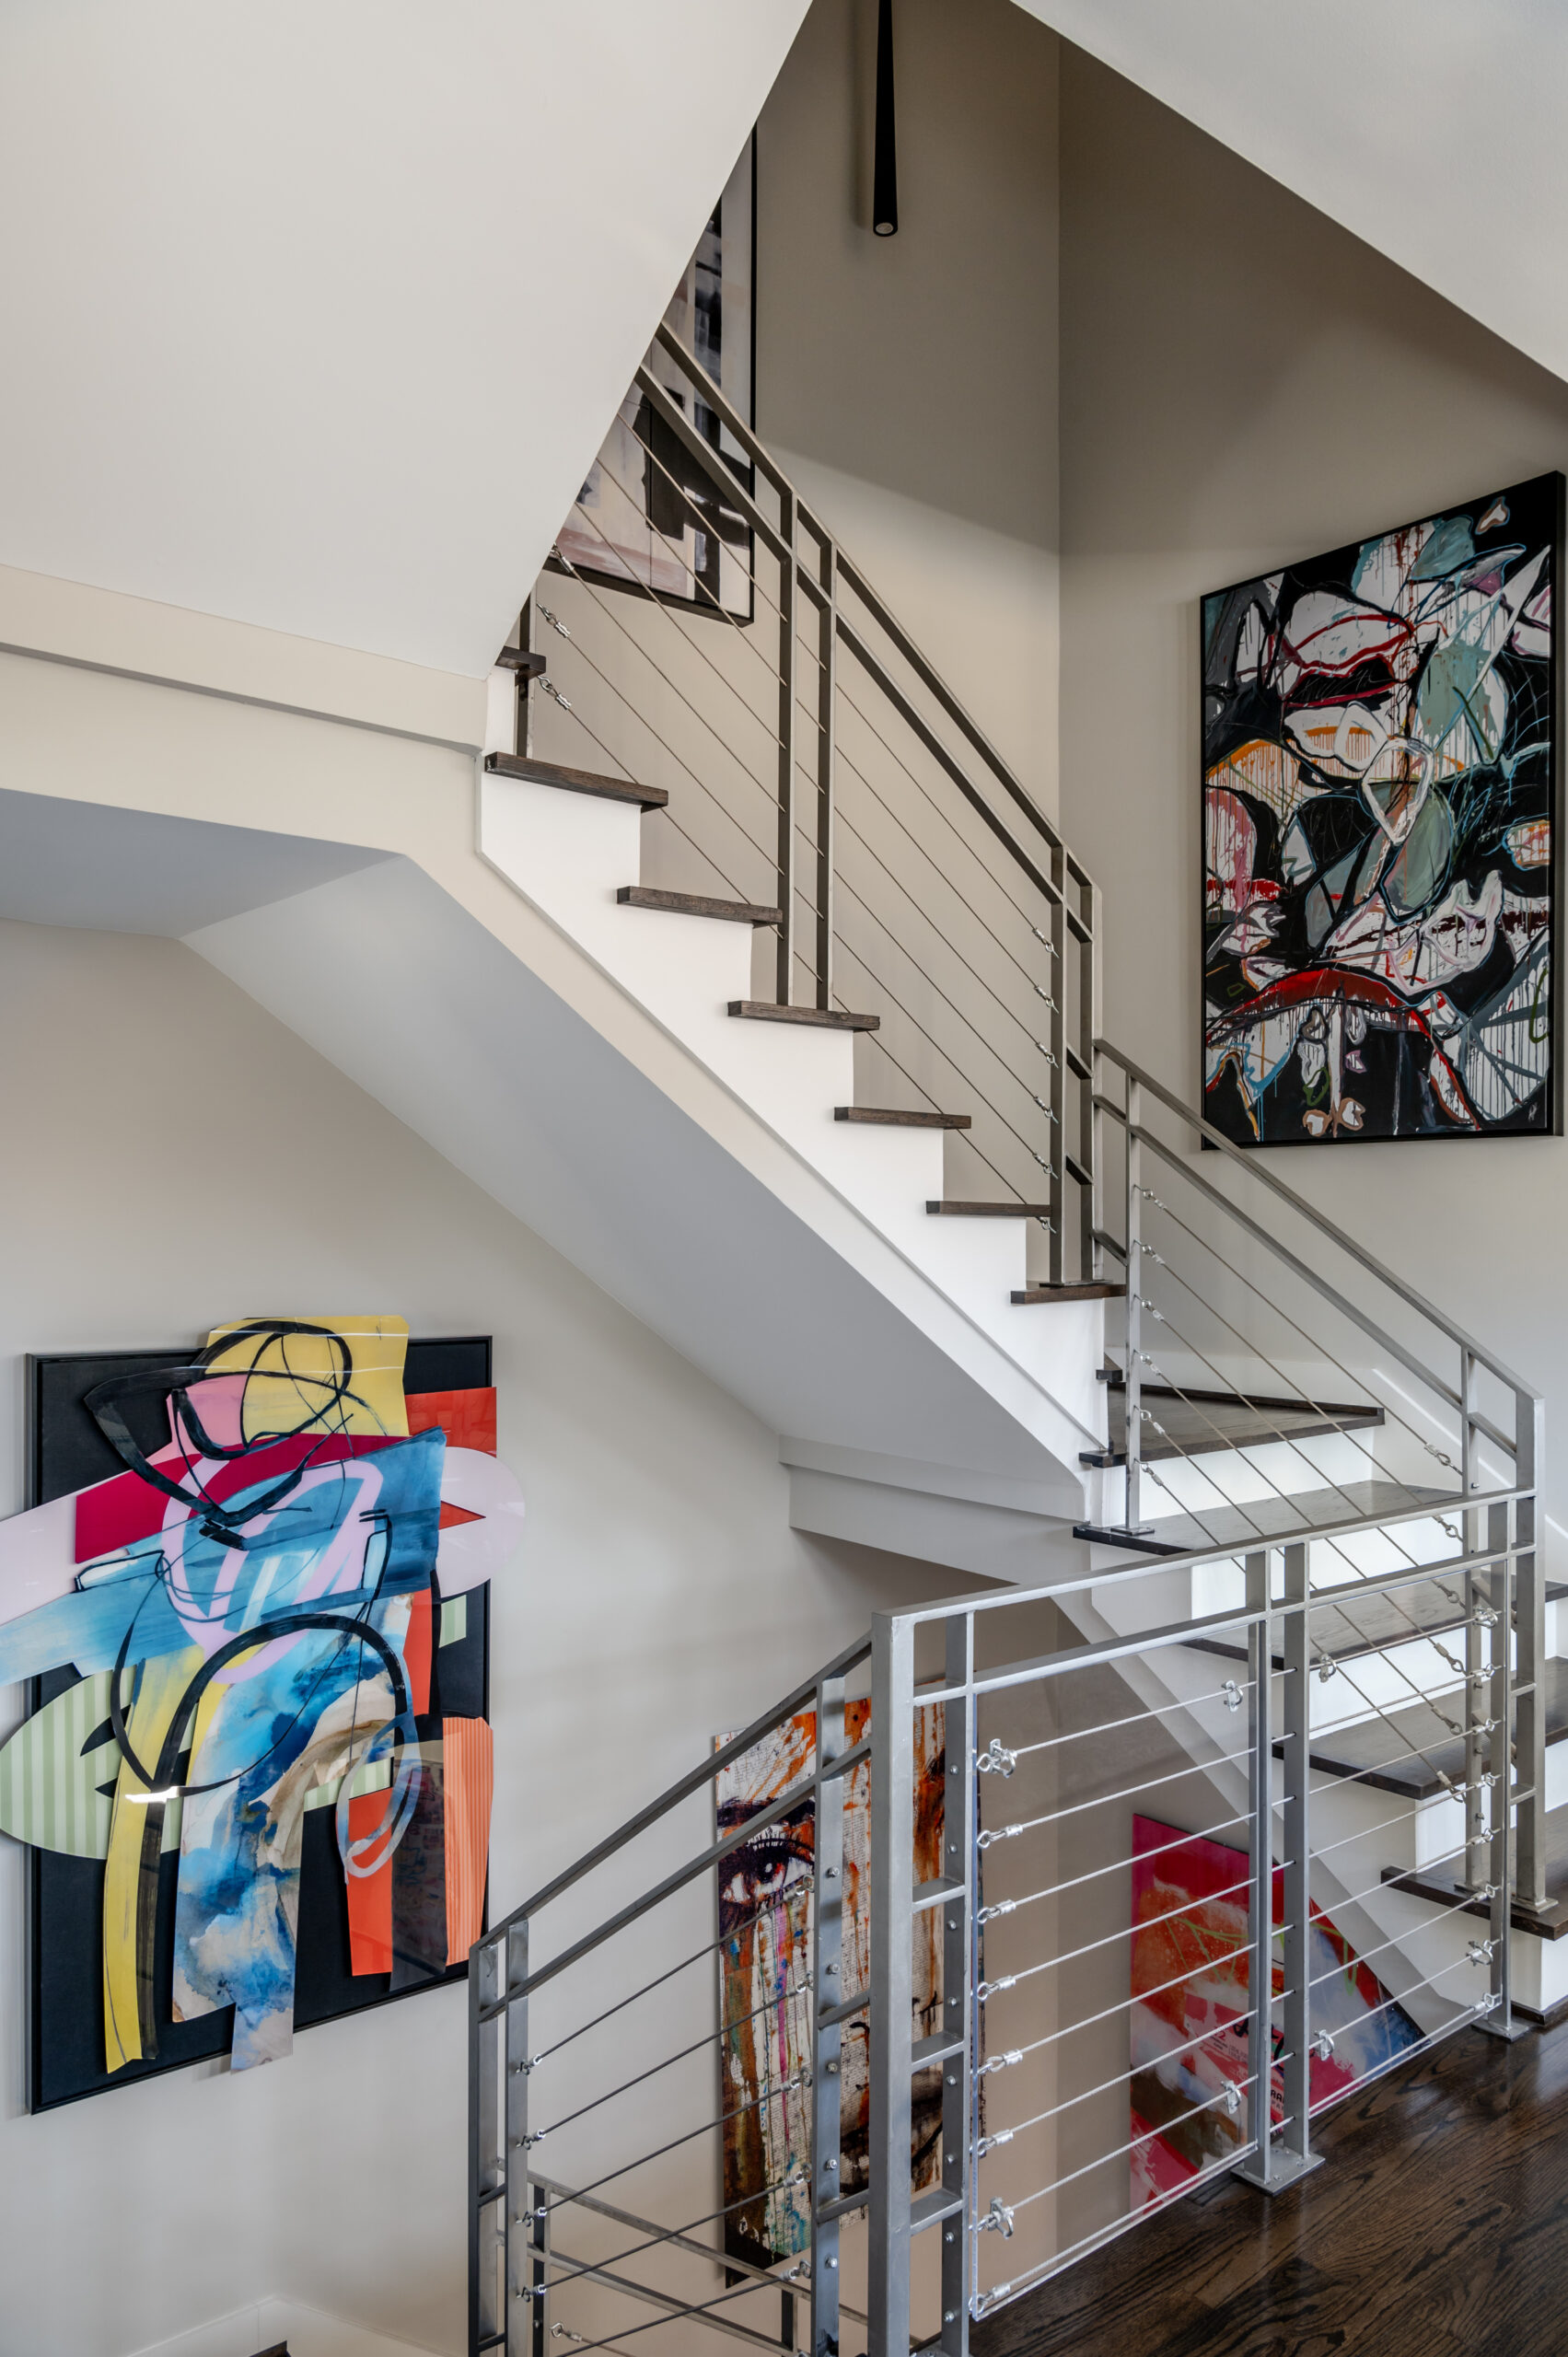 Stairway with funk wall art